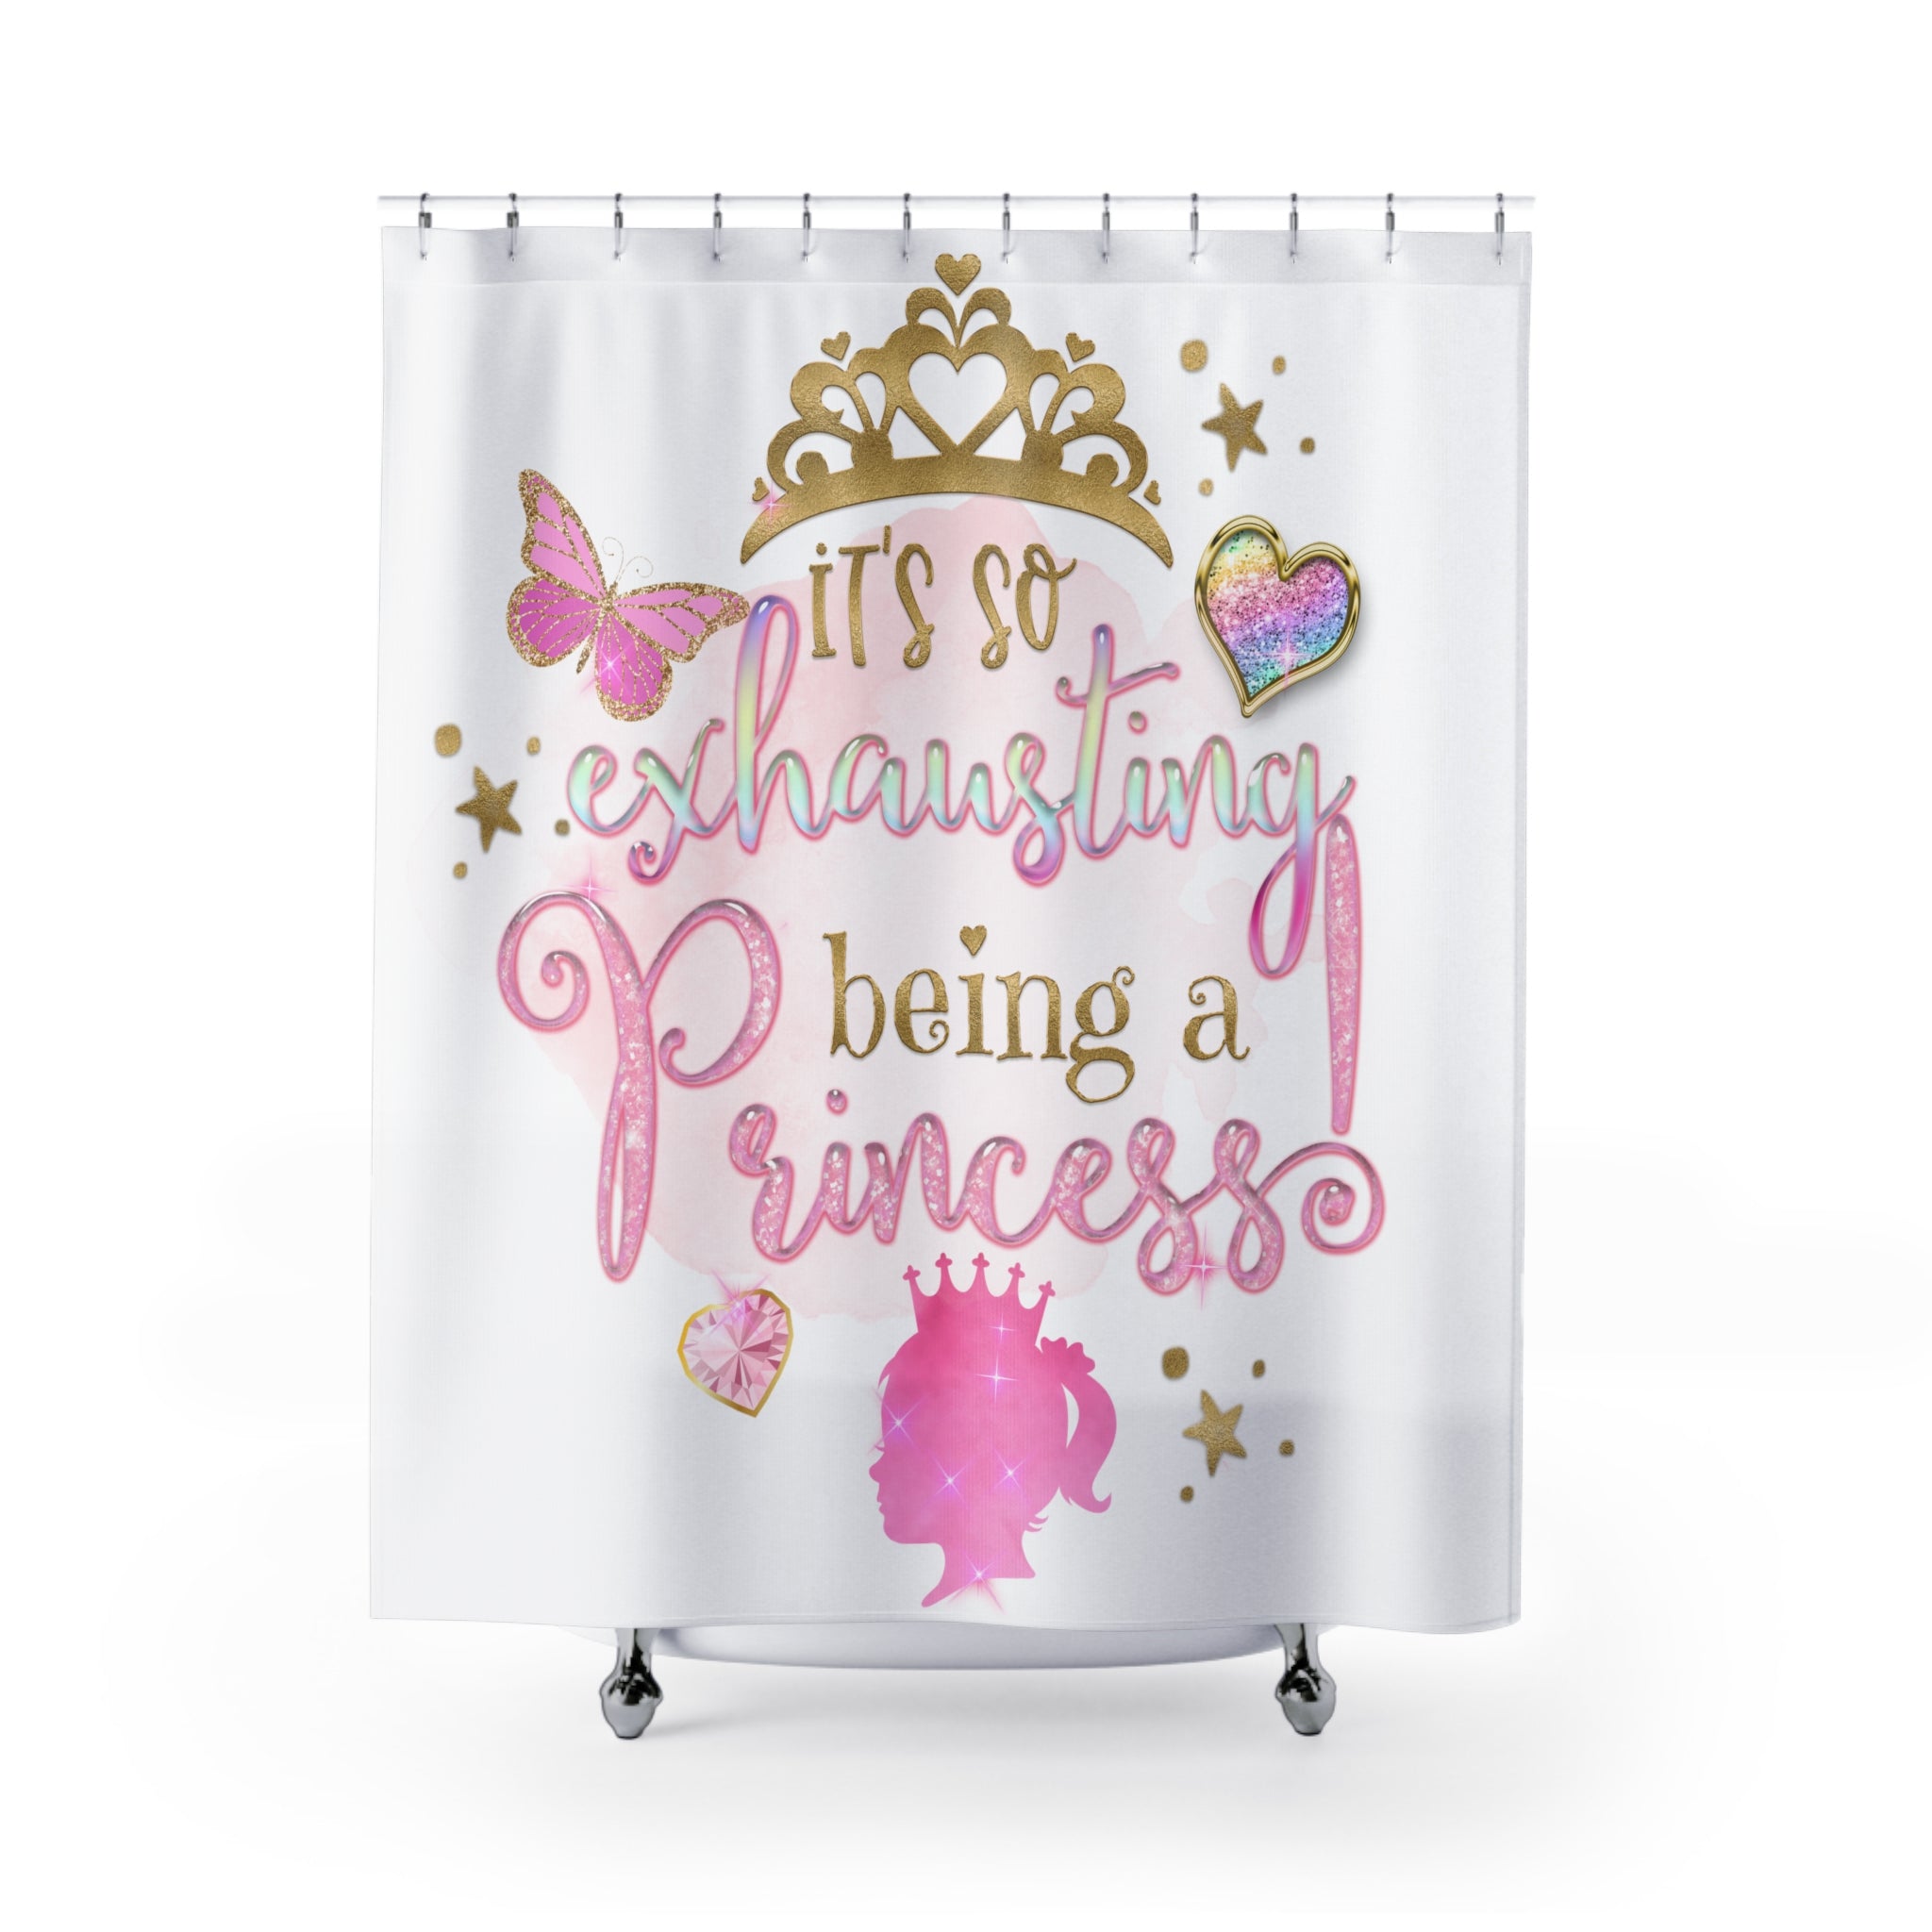 PoP! Shower Curtains - It's Exhausting Being a Princess